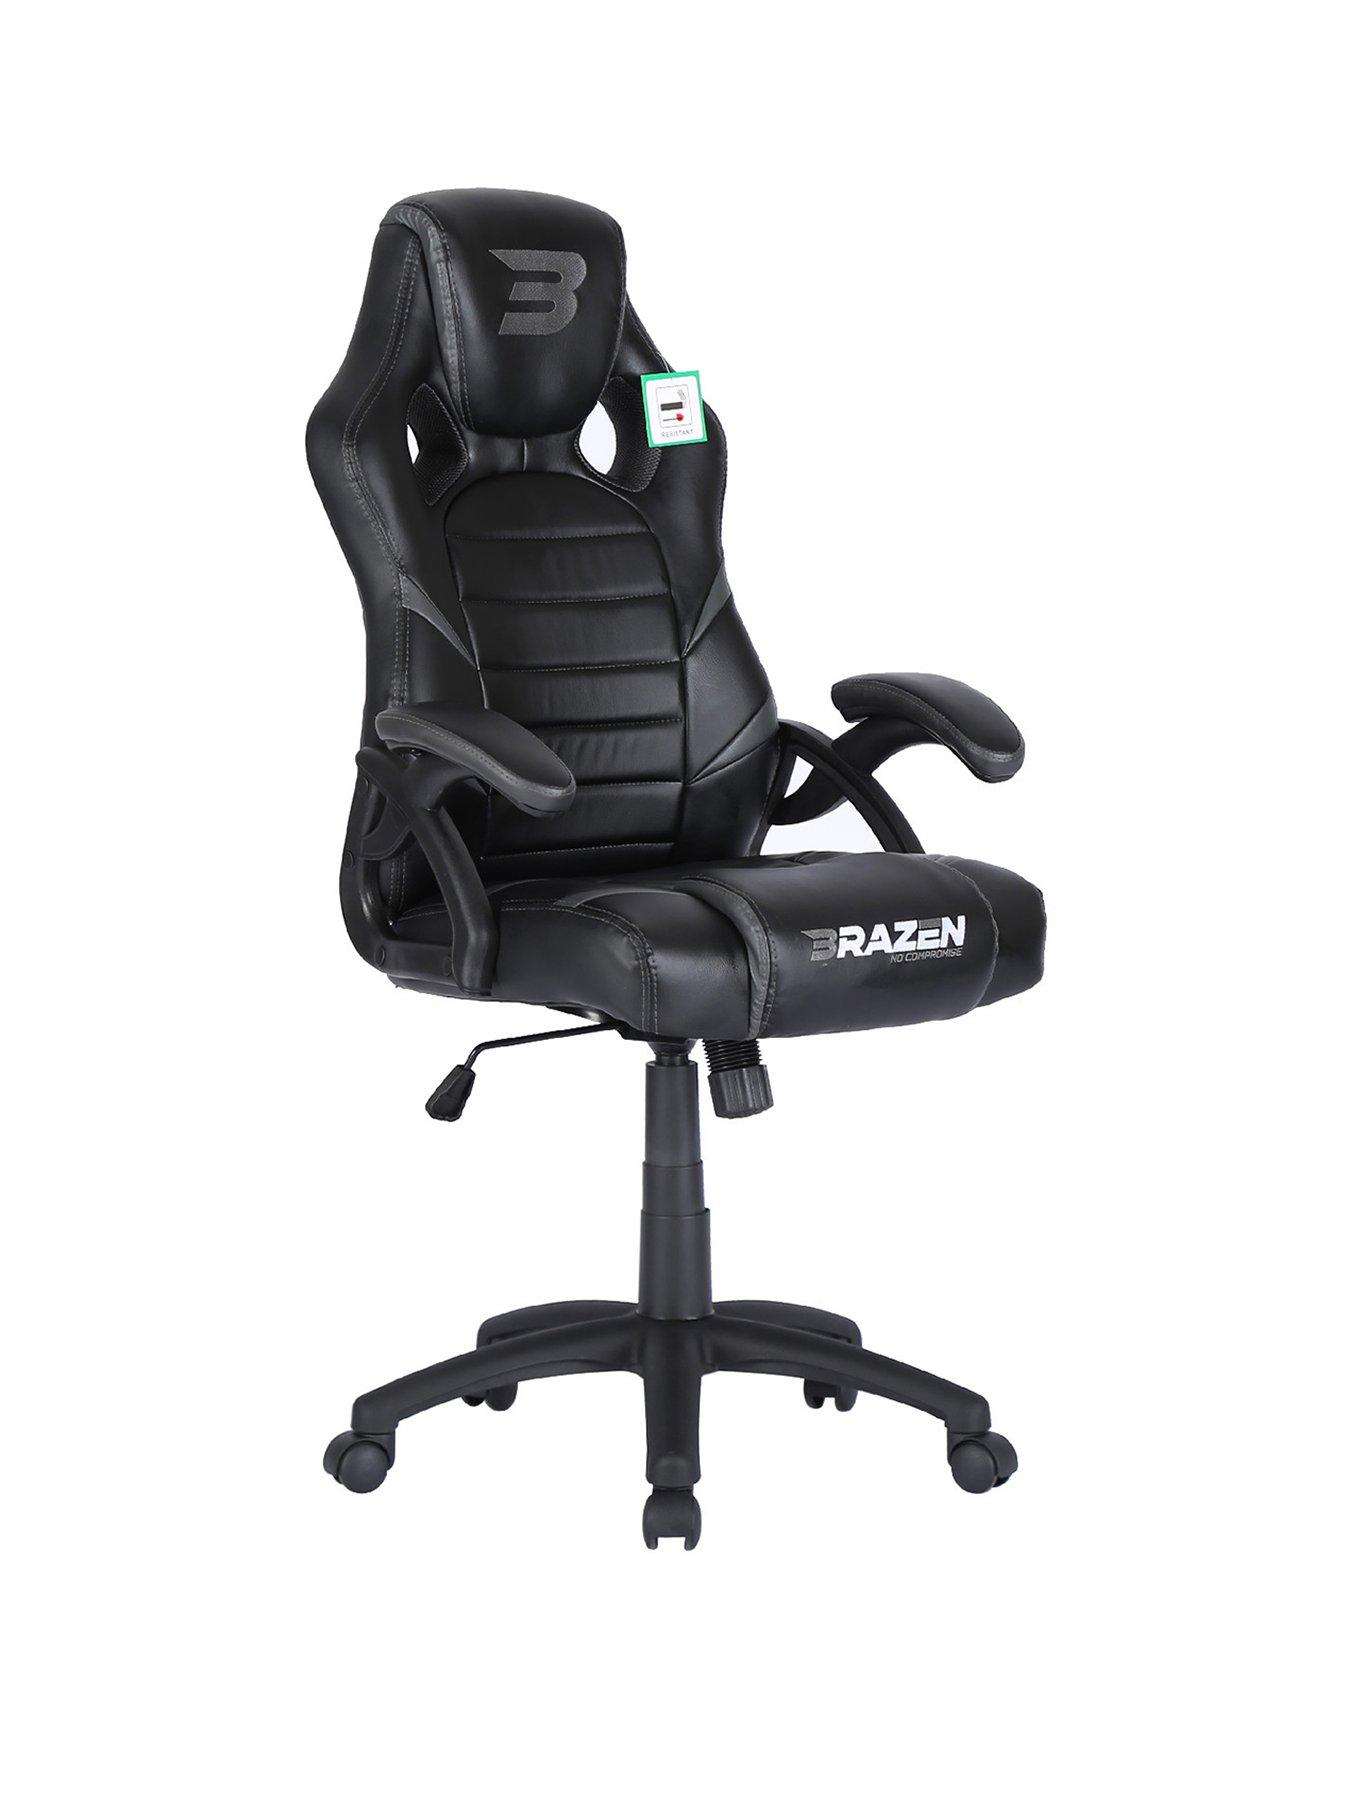 Xbox Series S, Gaming chairs, Gaming & dvd